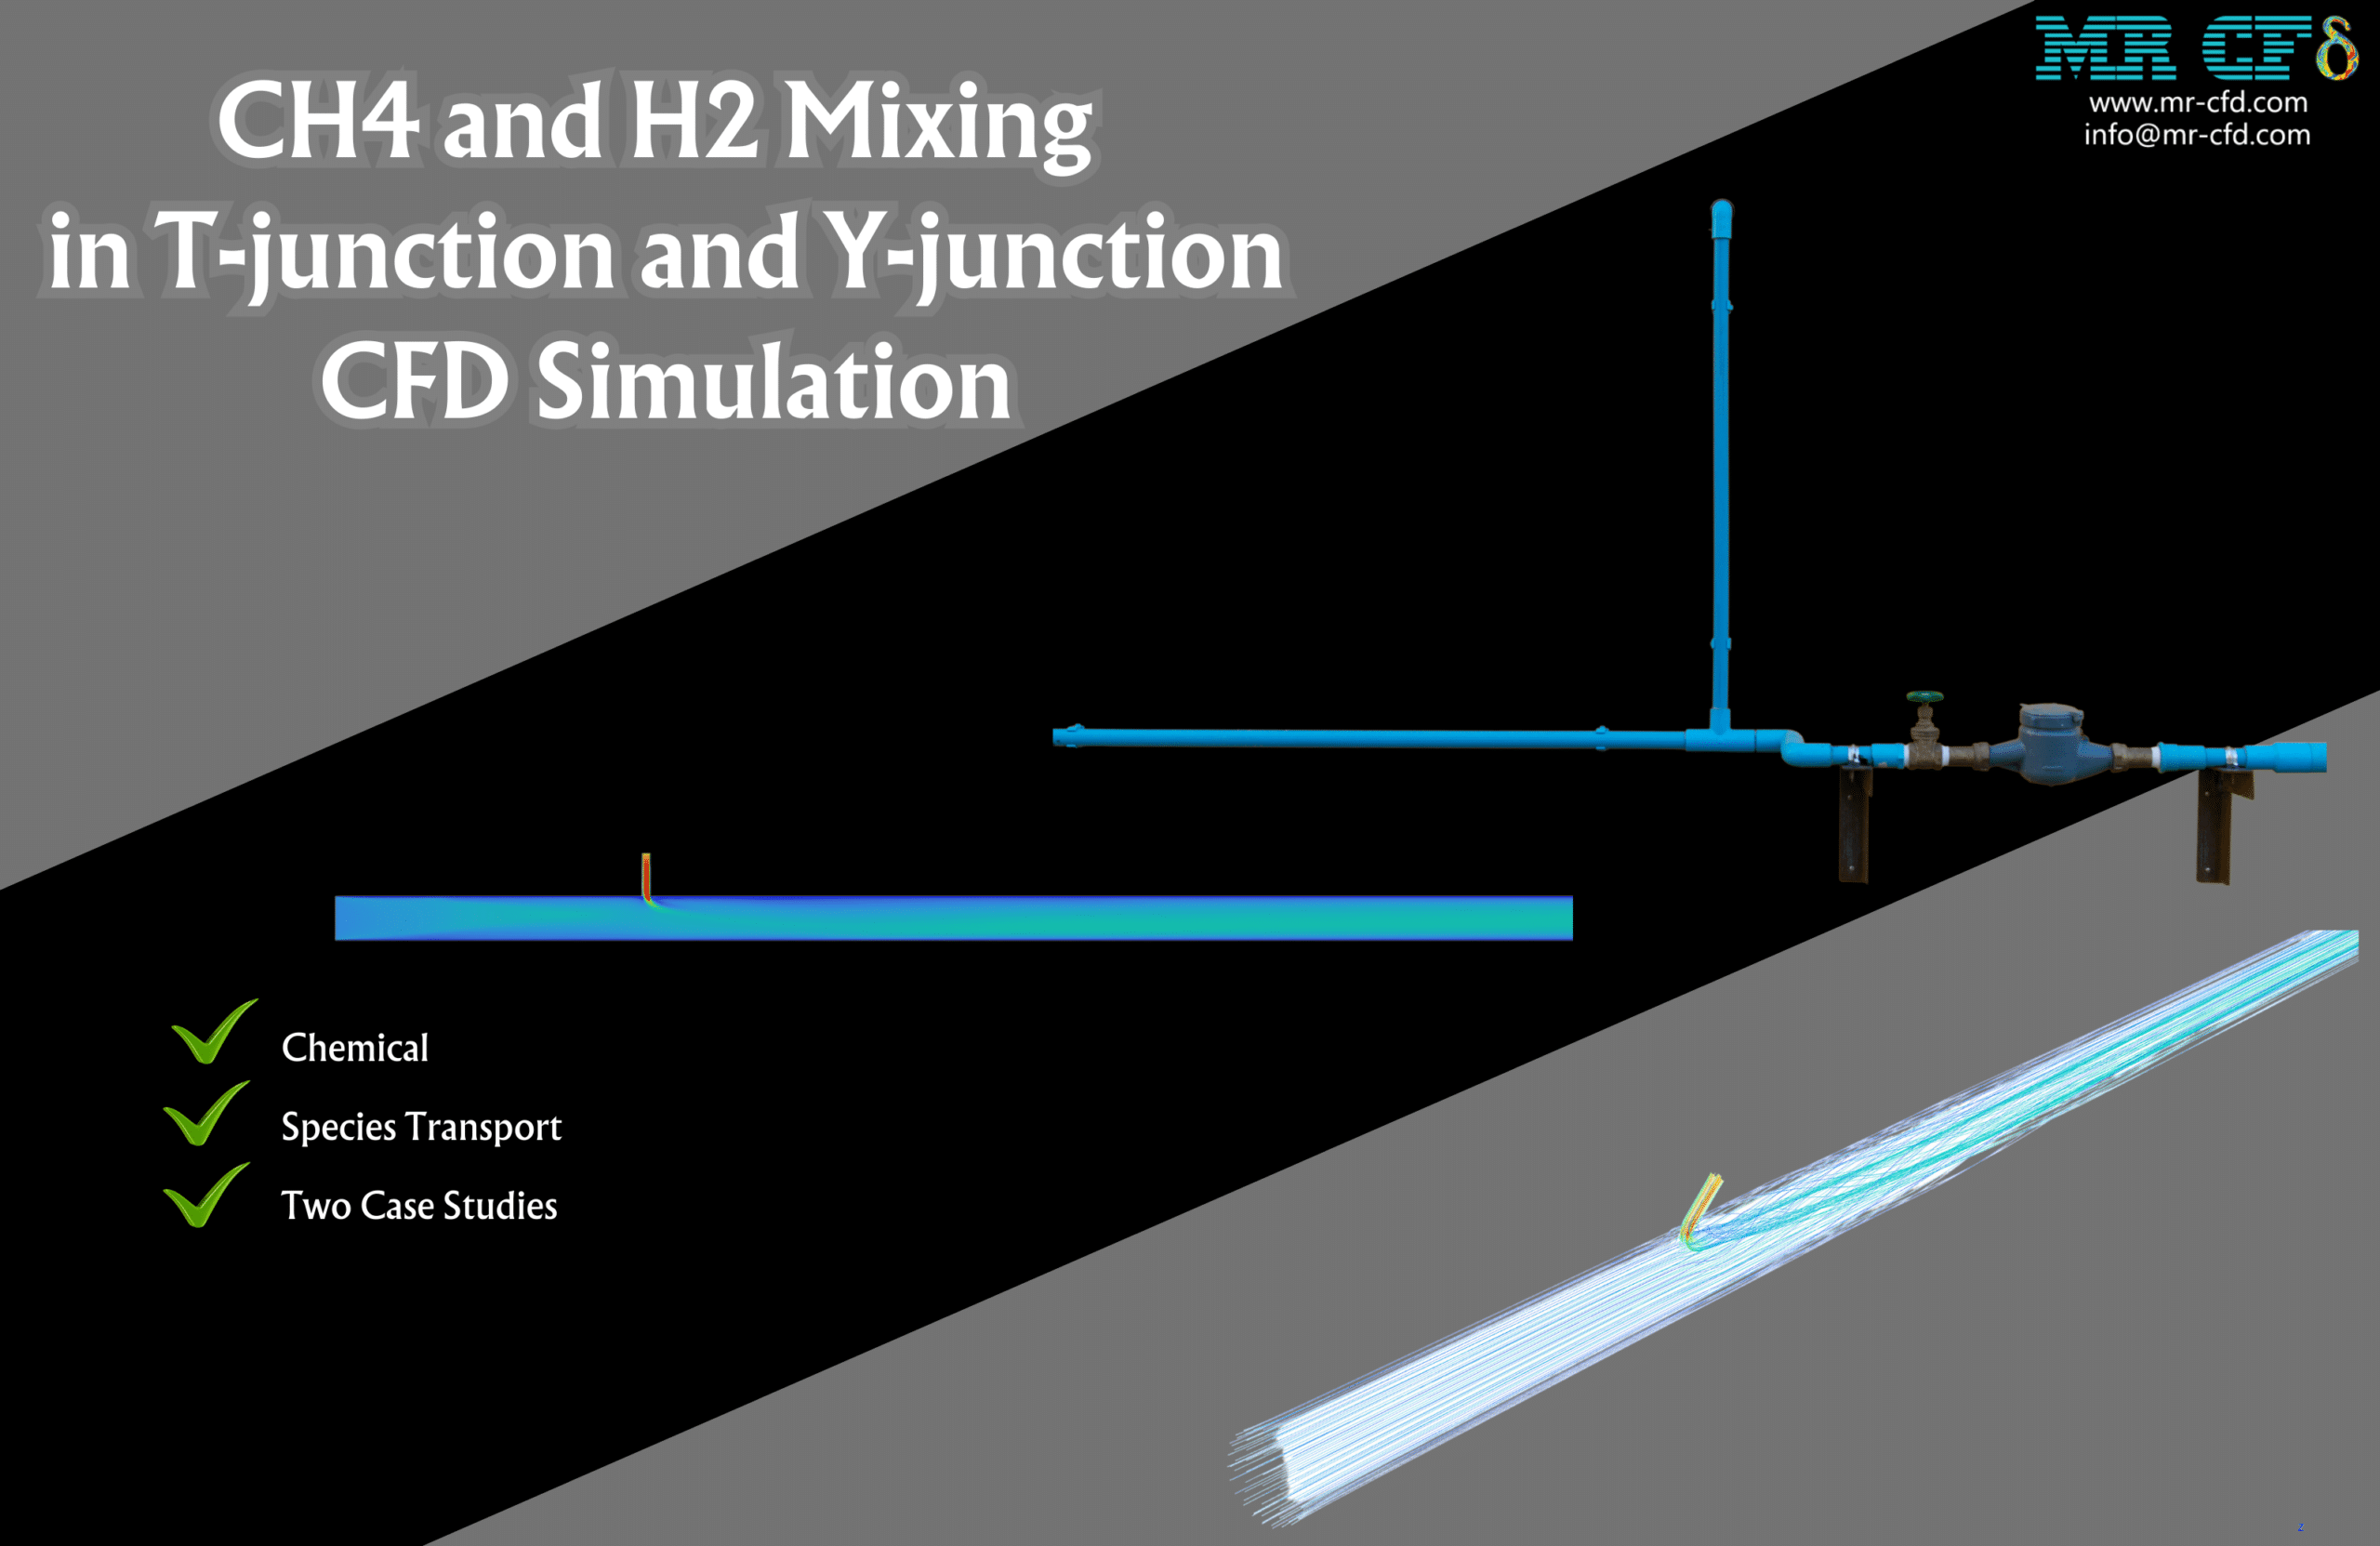 CH4 and H2 Mixing in T-junction and Y-junction CFD Simulation